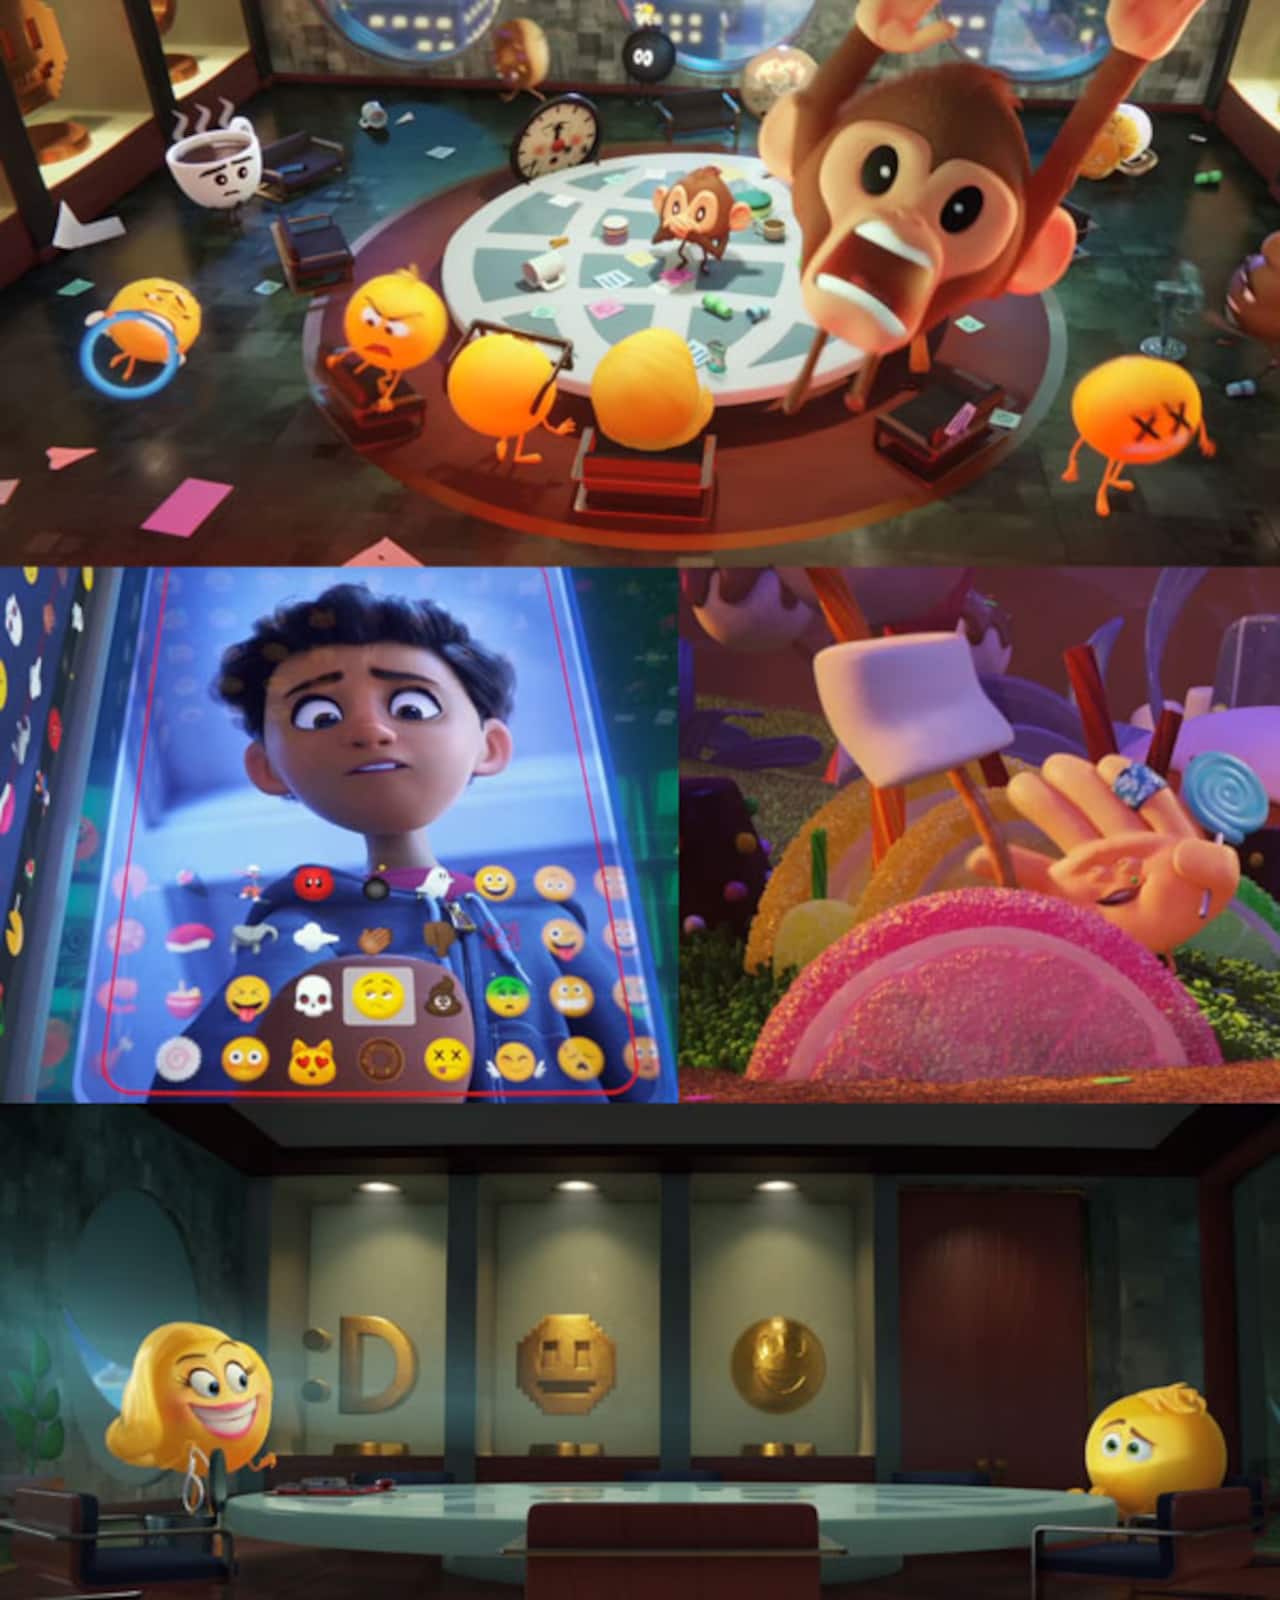 The Emoji Movie trailer: Is it me or did this movie about smileys remind  you of Inside Out and Wreck-It Ralph? - Bollywood News & Gossip, Movie  Reviews, Trailers & Videos at